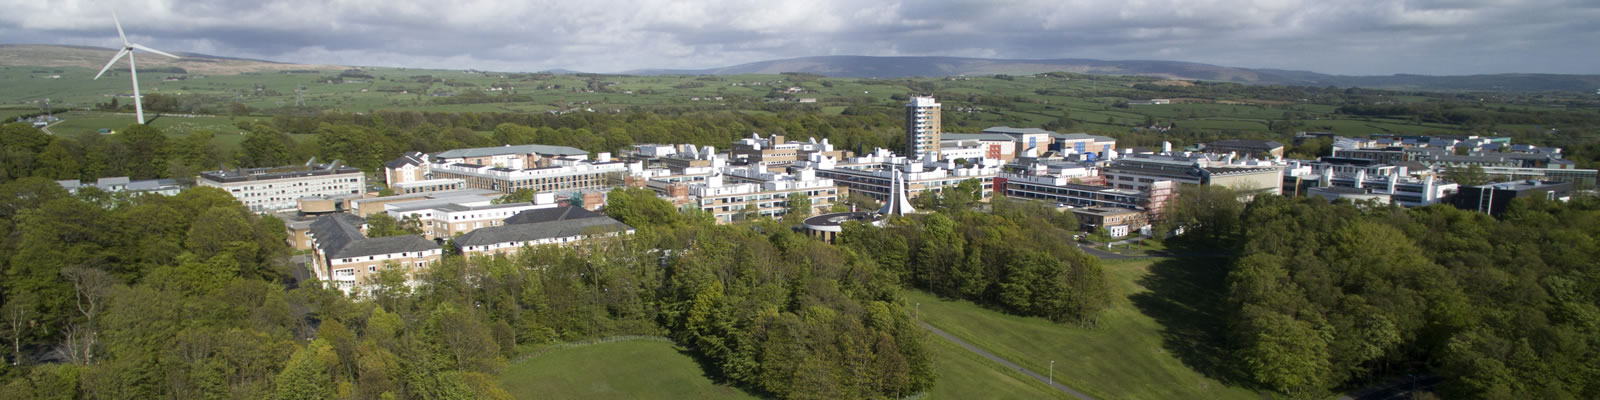 Aerial view of Lancaster University